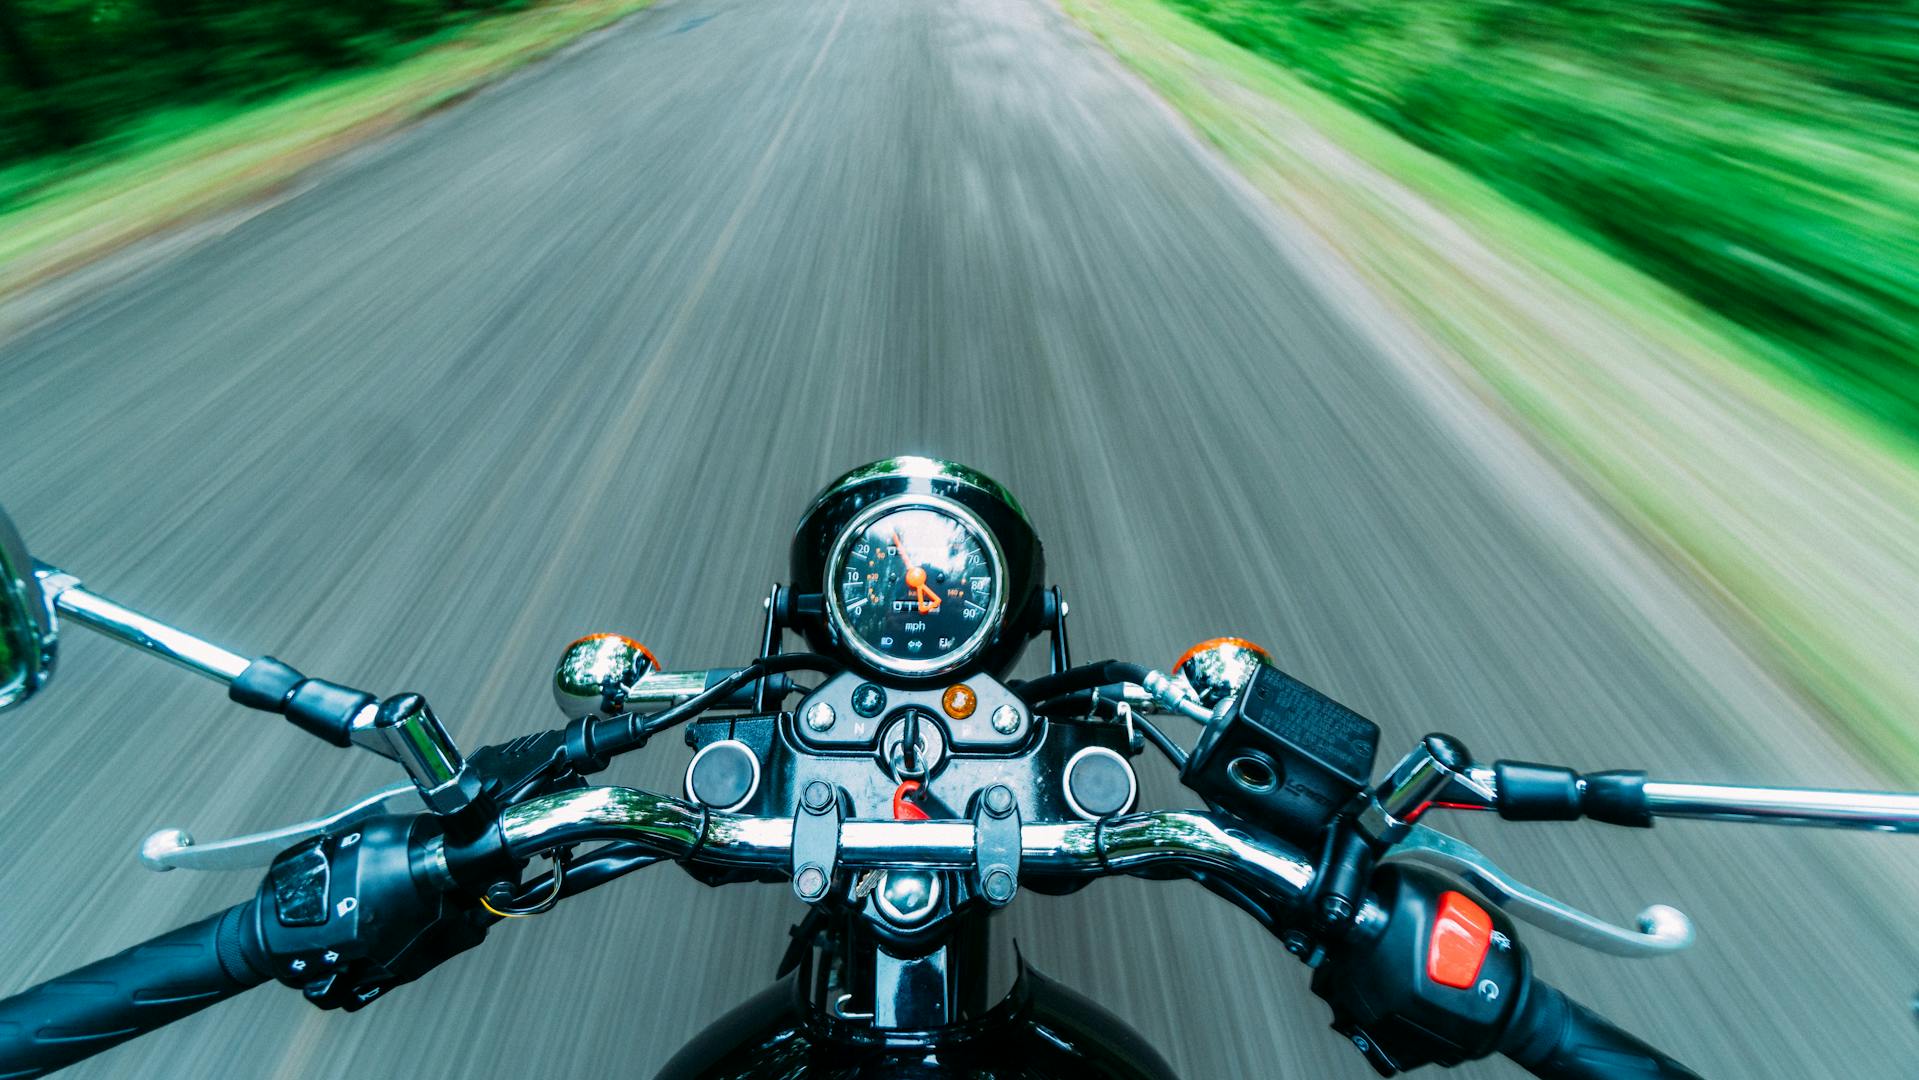 Beginner’s Guide to Motorcycling